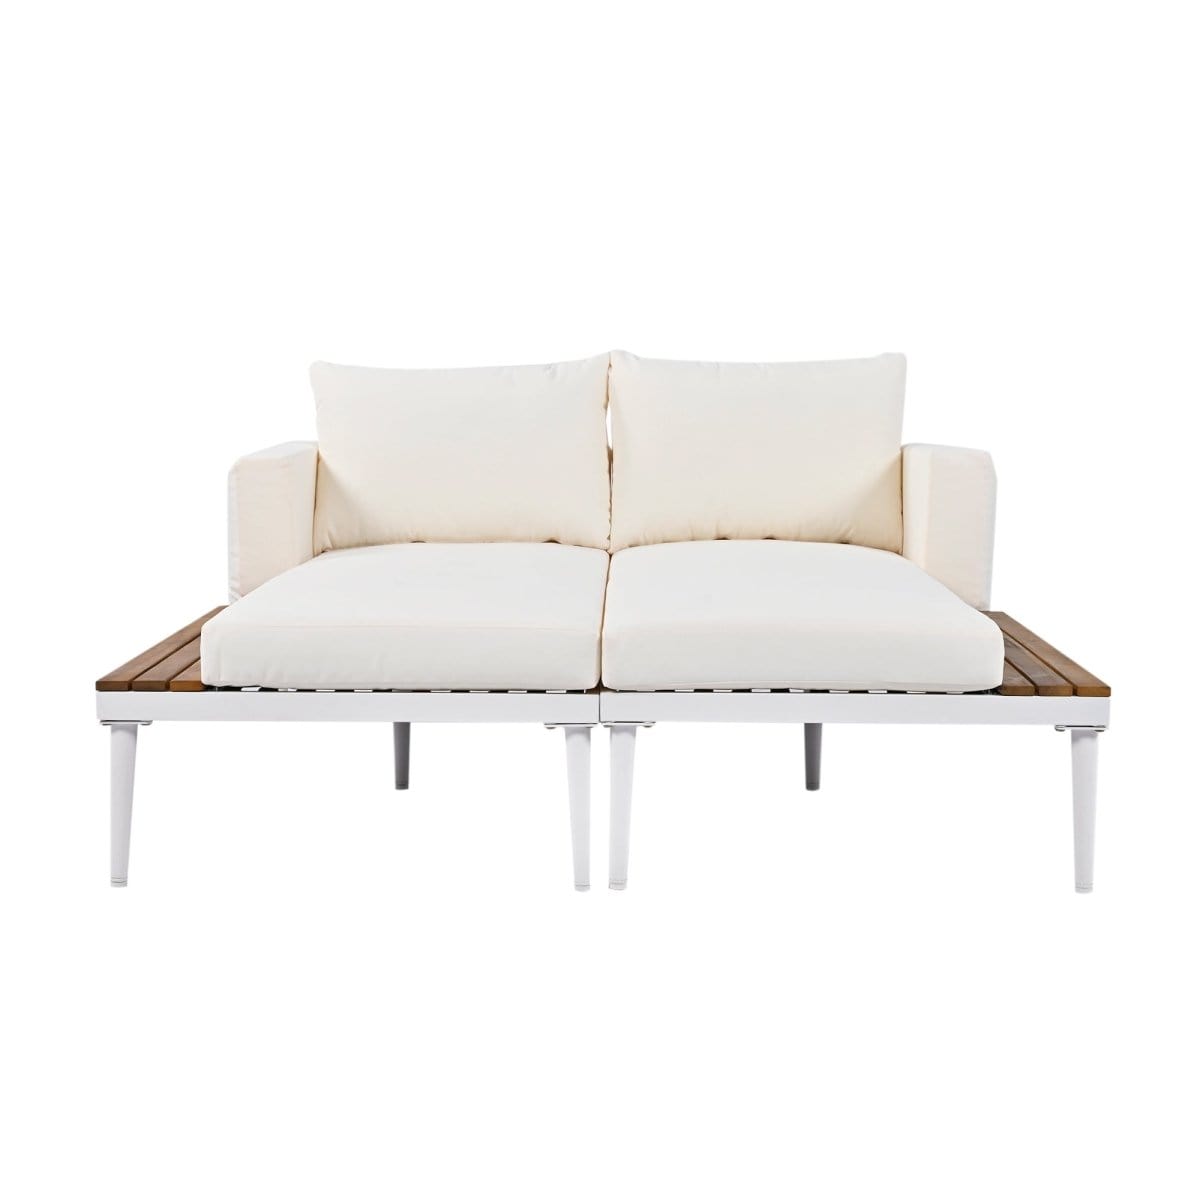 Modern Outdoor Daybed Sofa10Topmaxx